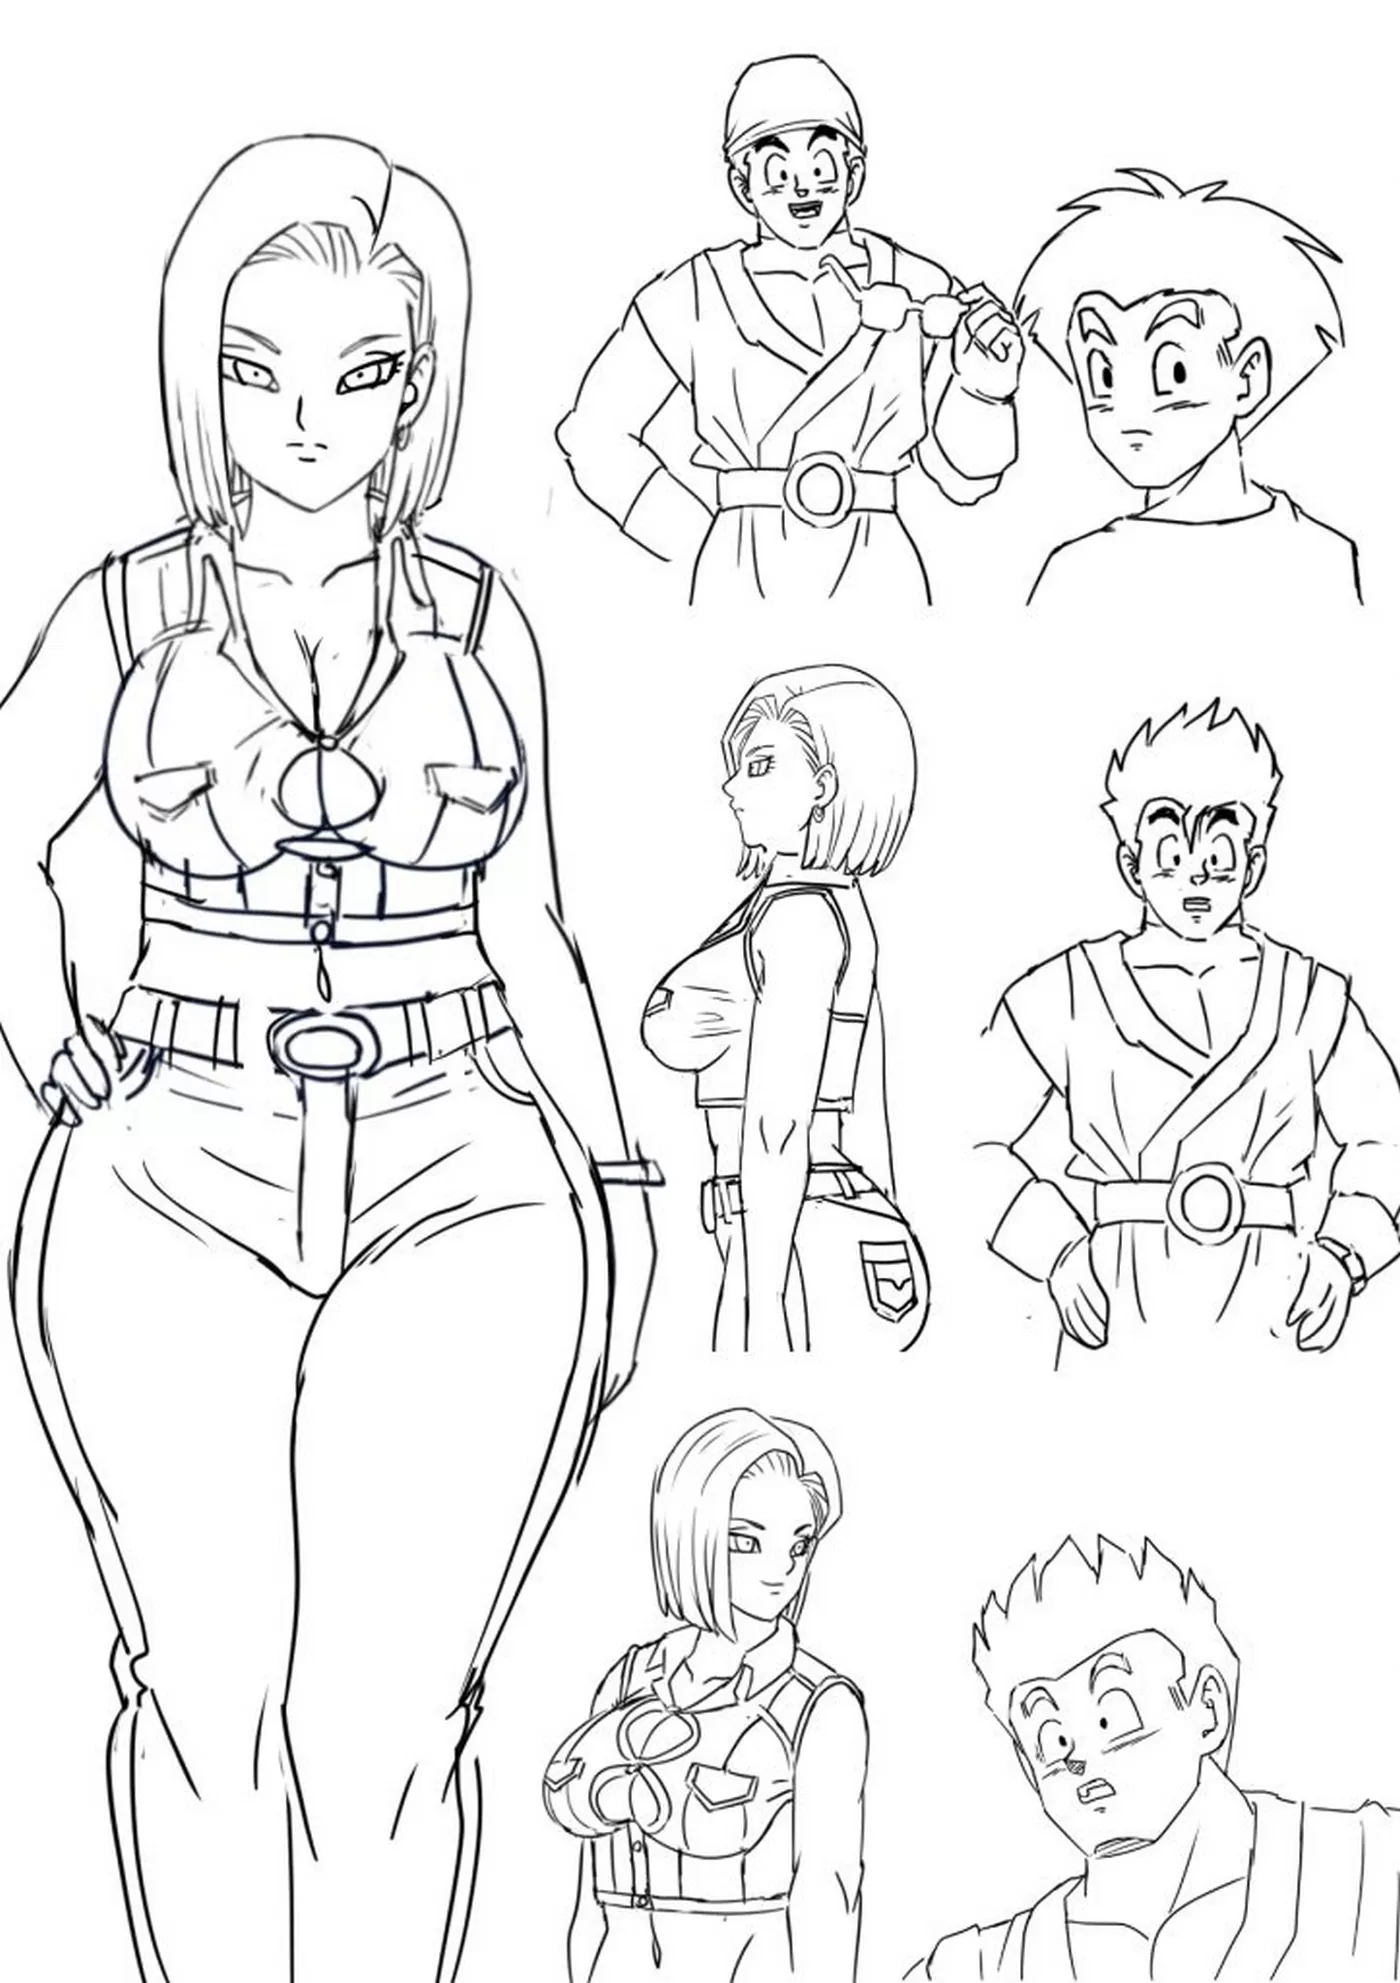 DBZ PORN ANDROID 18